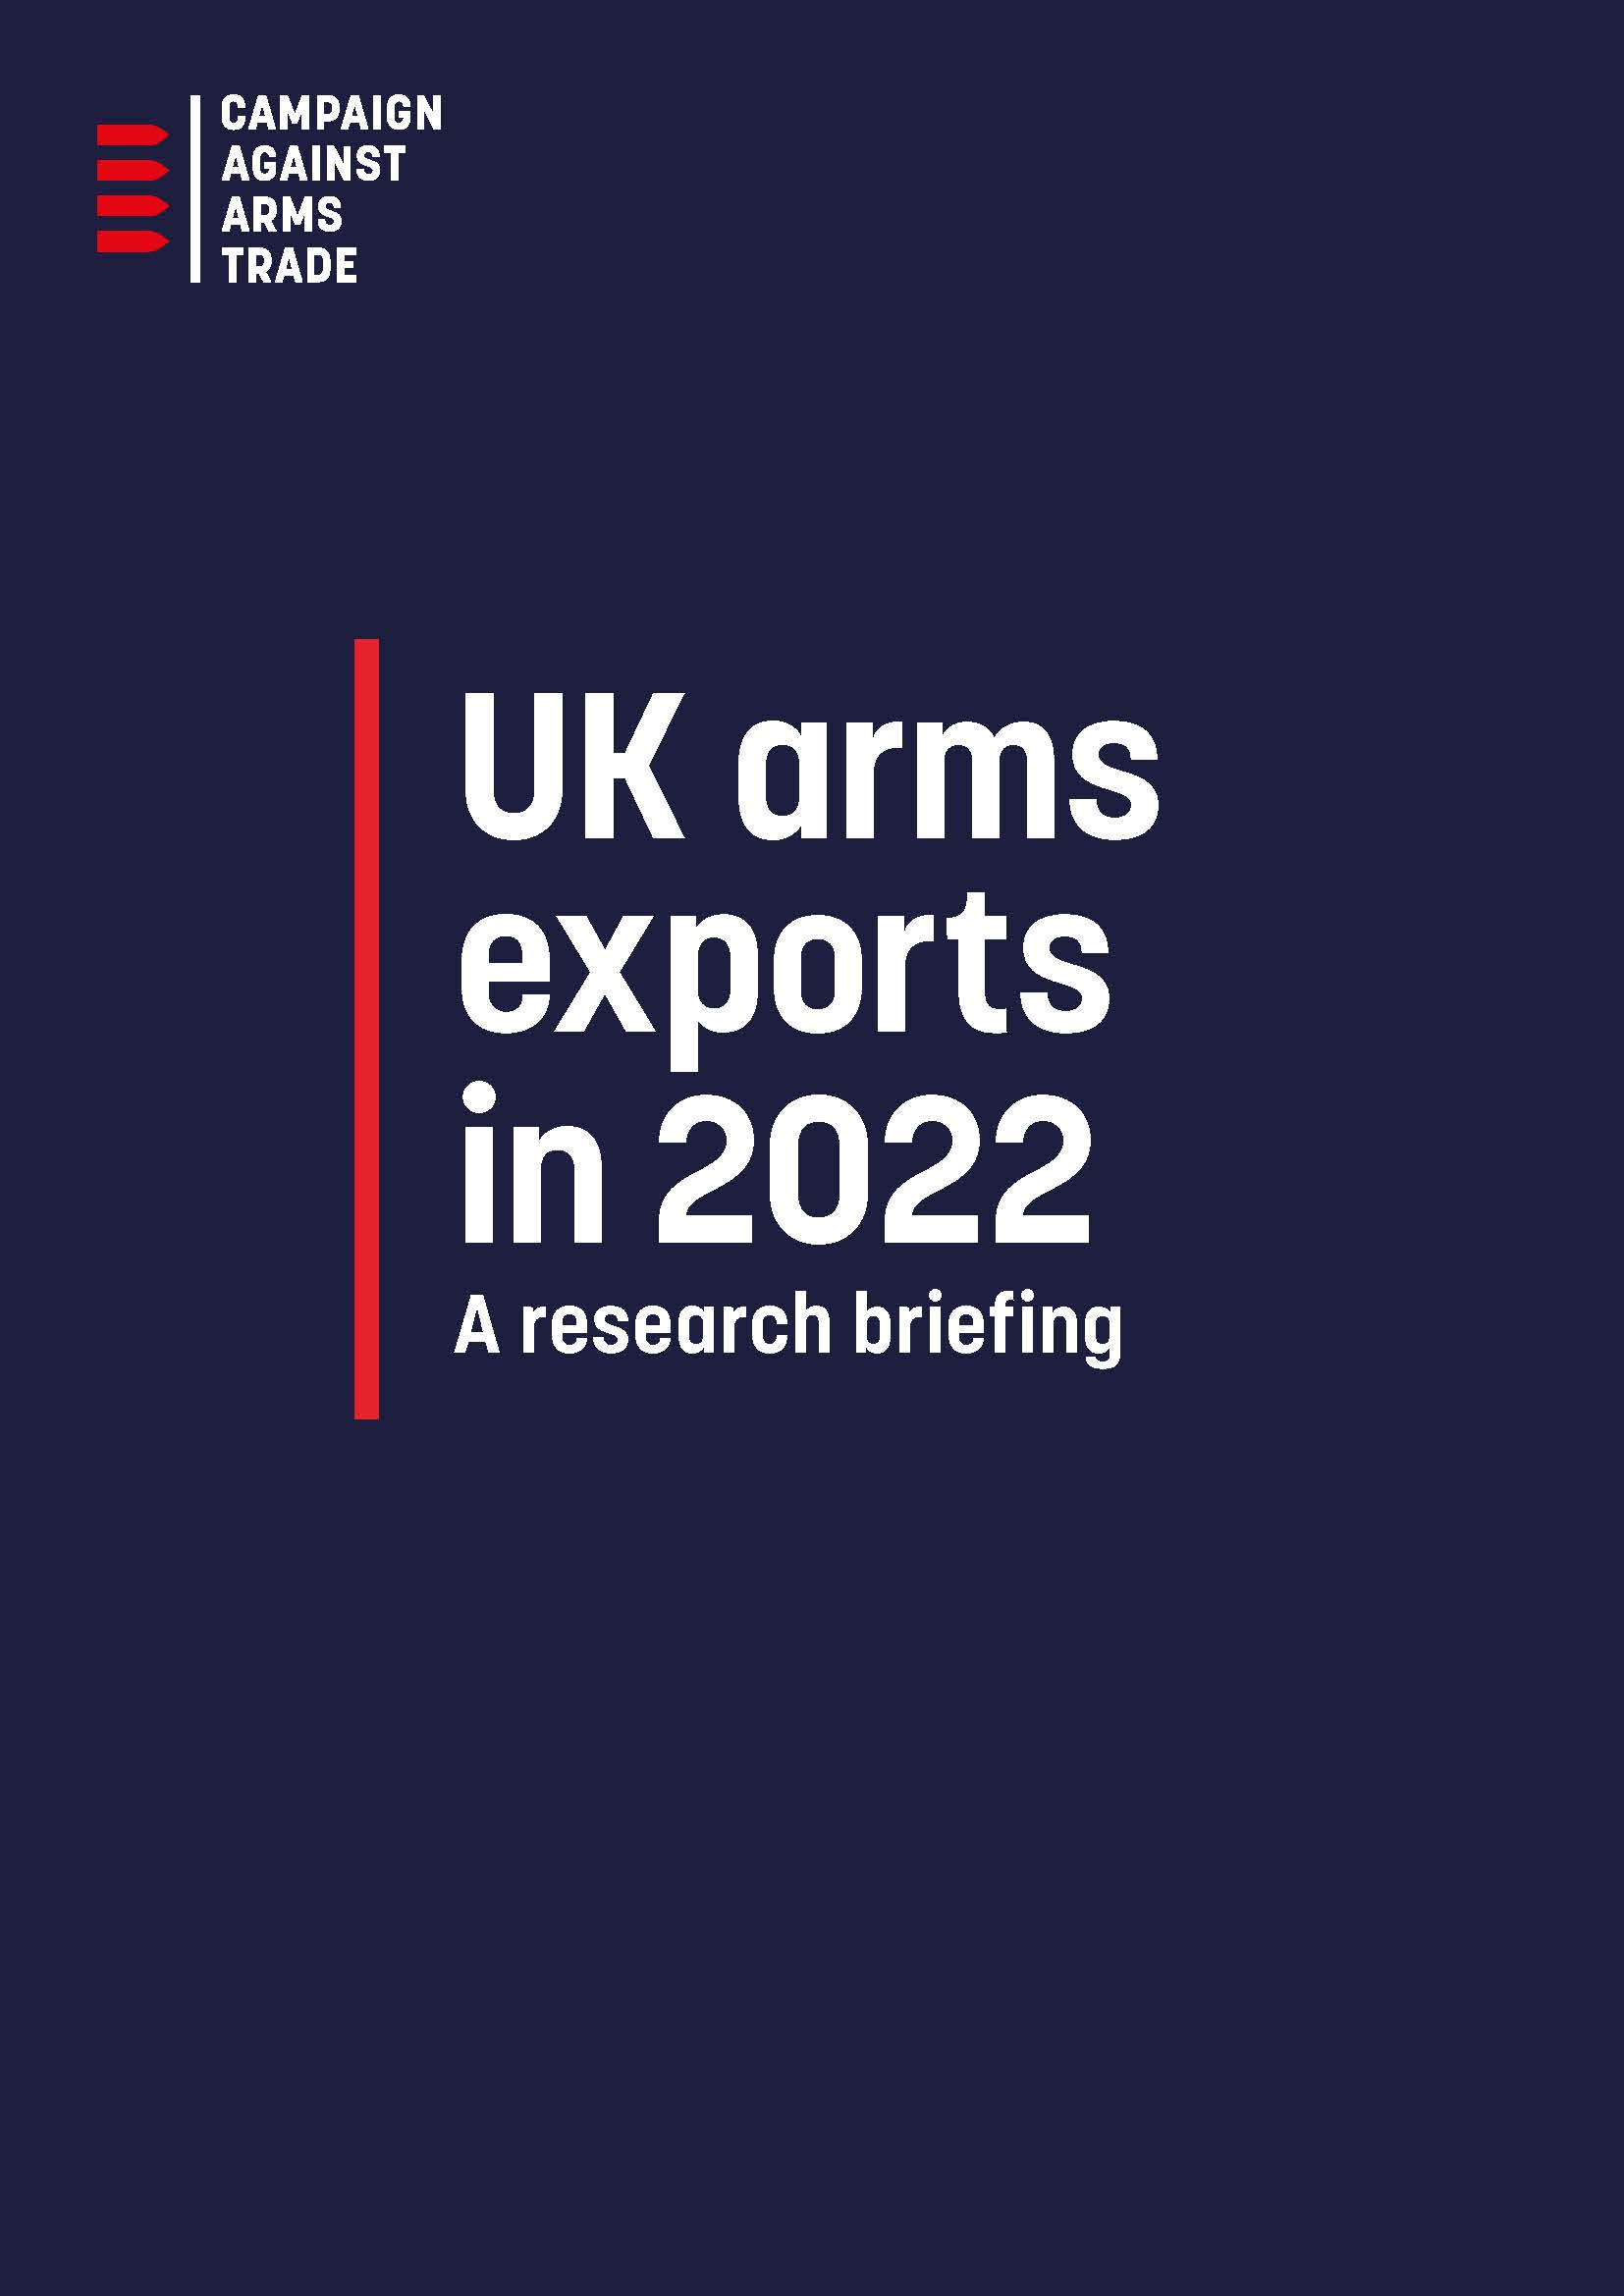 Report cover. CAAR logo in top left. Title: "UK arms exports in 2022 - a research briefing"